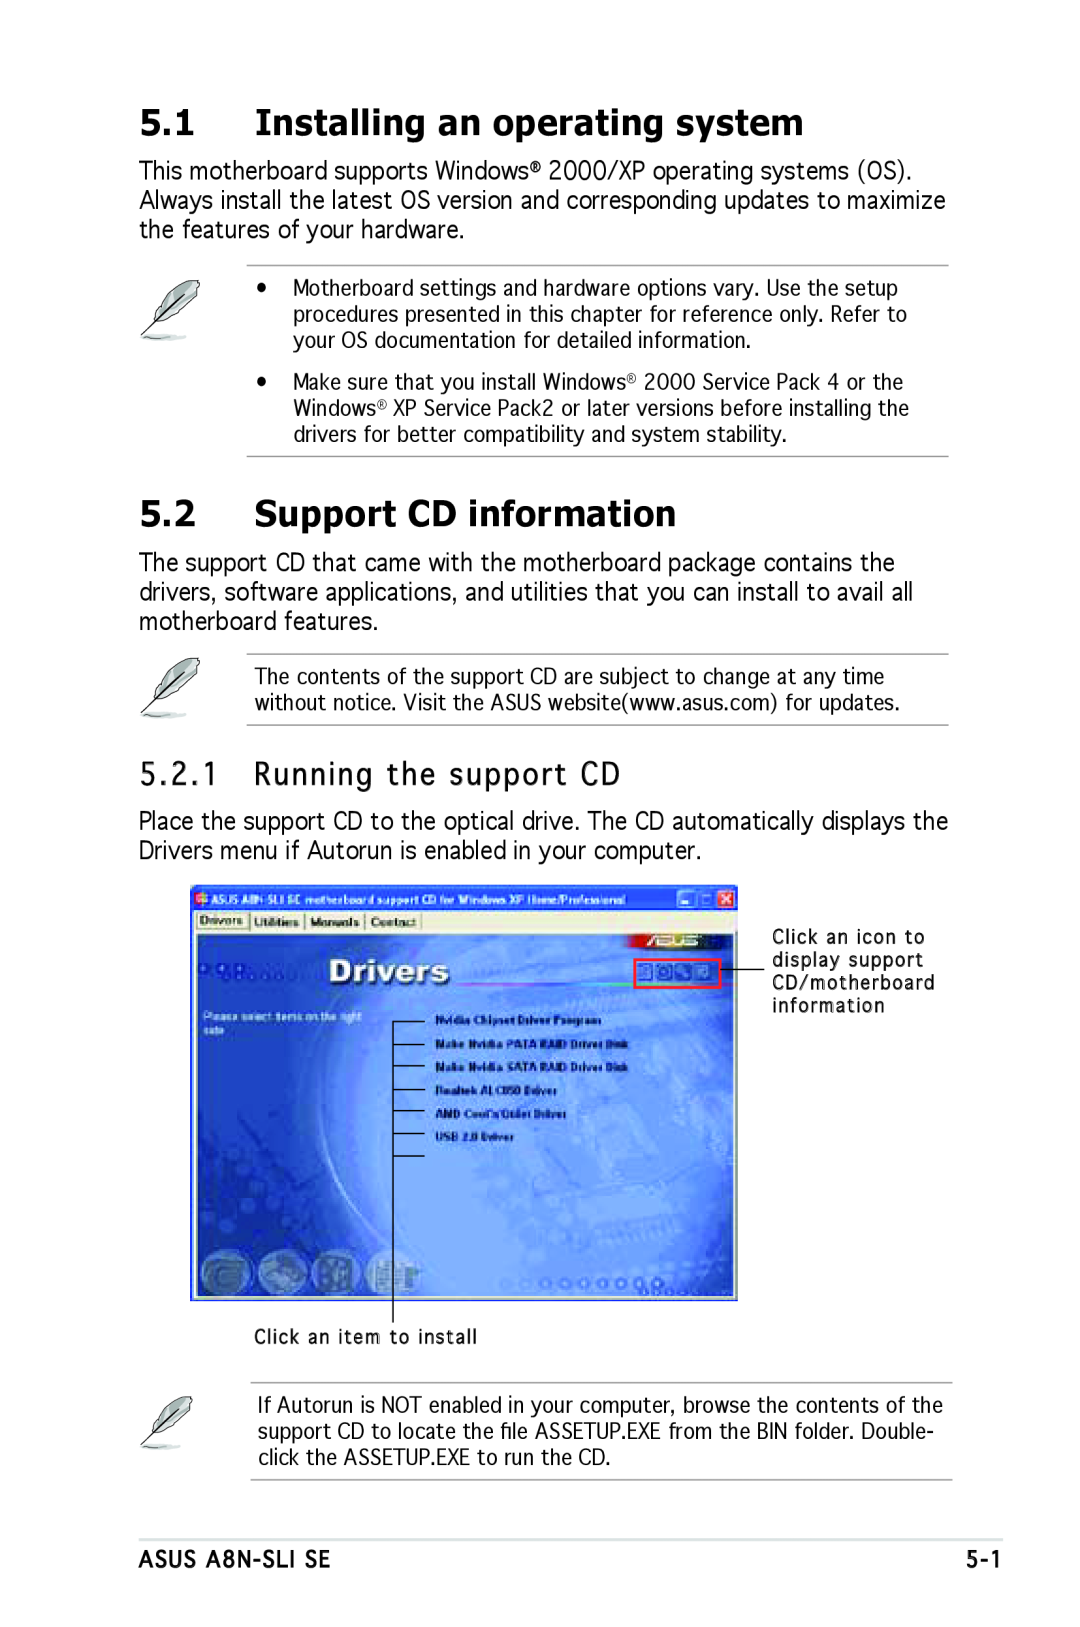 Asus A8N-SLI SE manual Installing an operating system, Support CD information, Running the support CD 